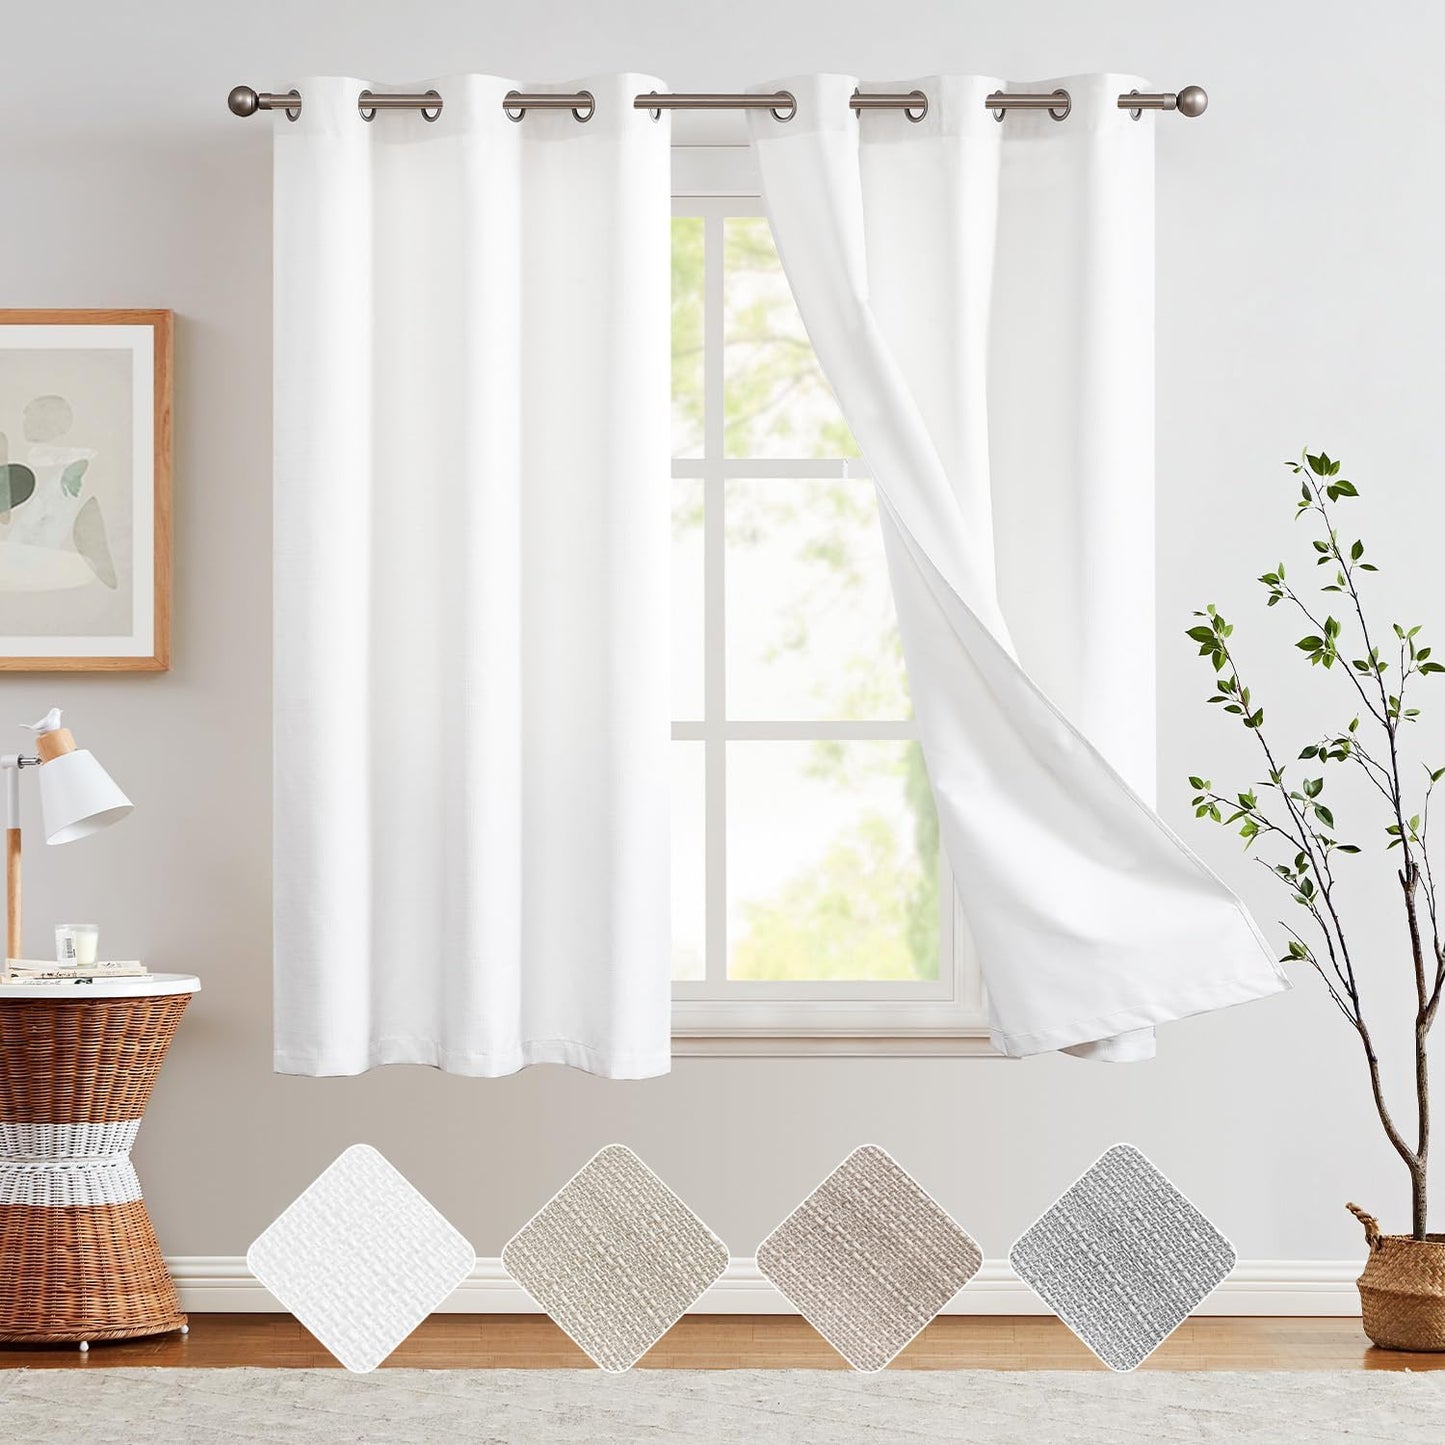 COLLACT White Linen Textured Curtains 84 Inch Length 2 Panels for Living Room Casual Weave Light Filtering Semi Sheer Curtains & Drapes for Bedroom Grommet Top Window Treatments, W38 X L84, White  COLLACT Blackout | Textured White W38 X L63 